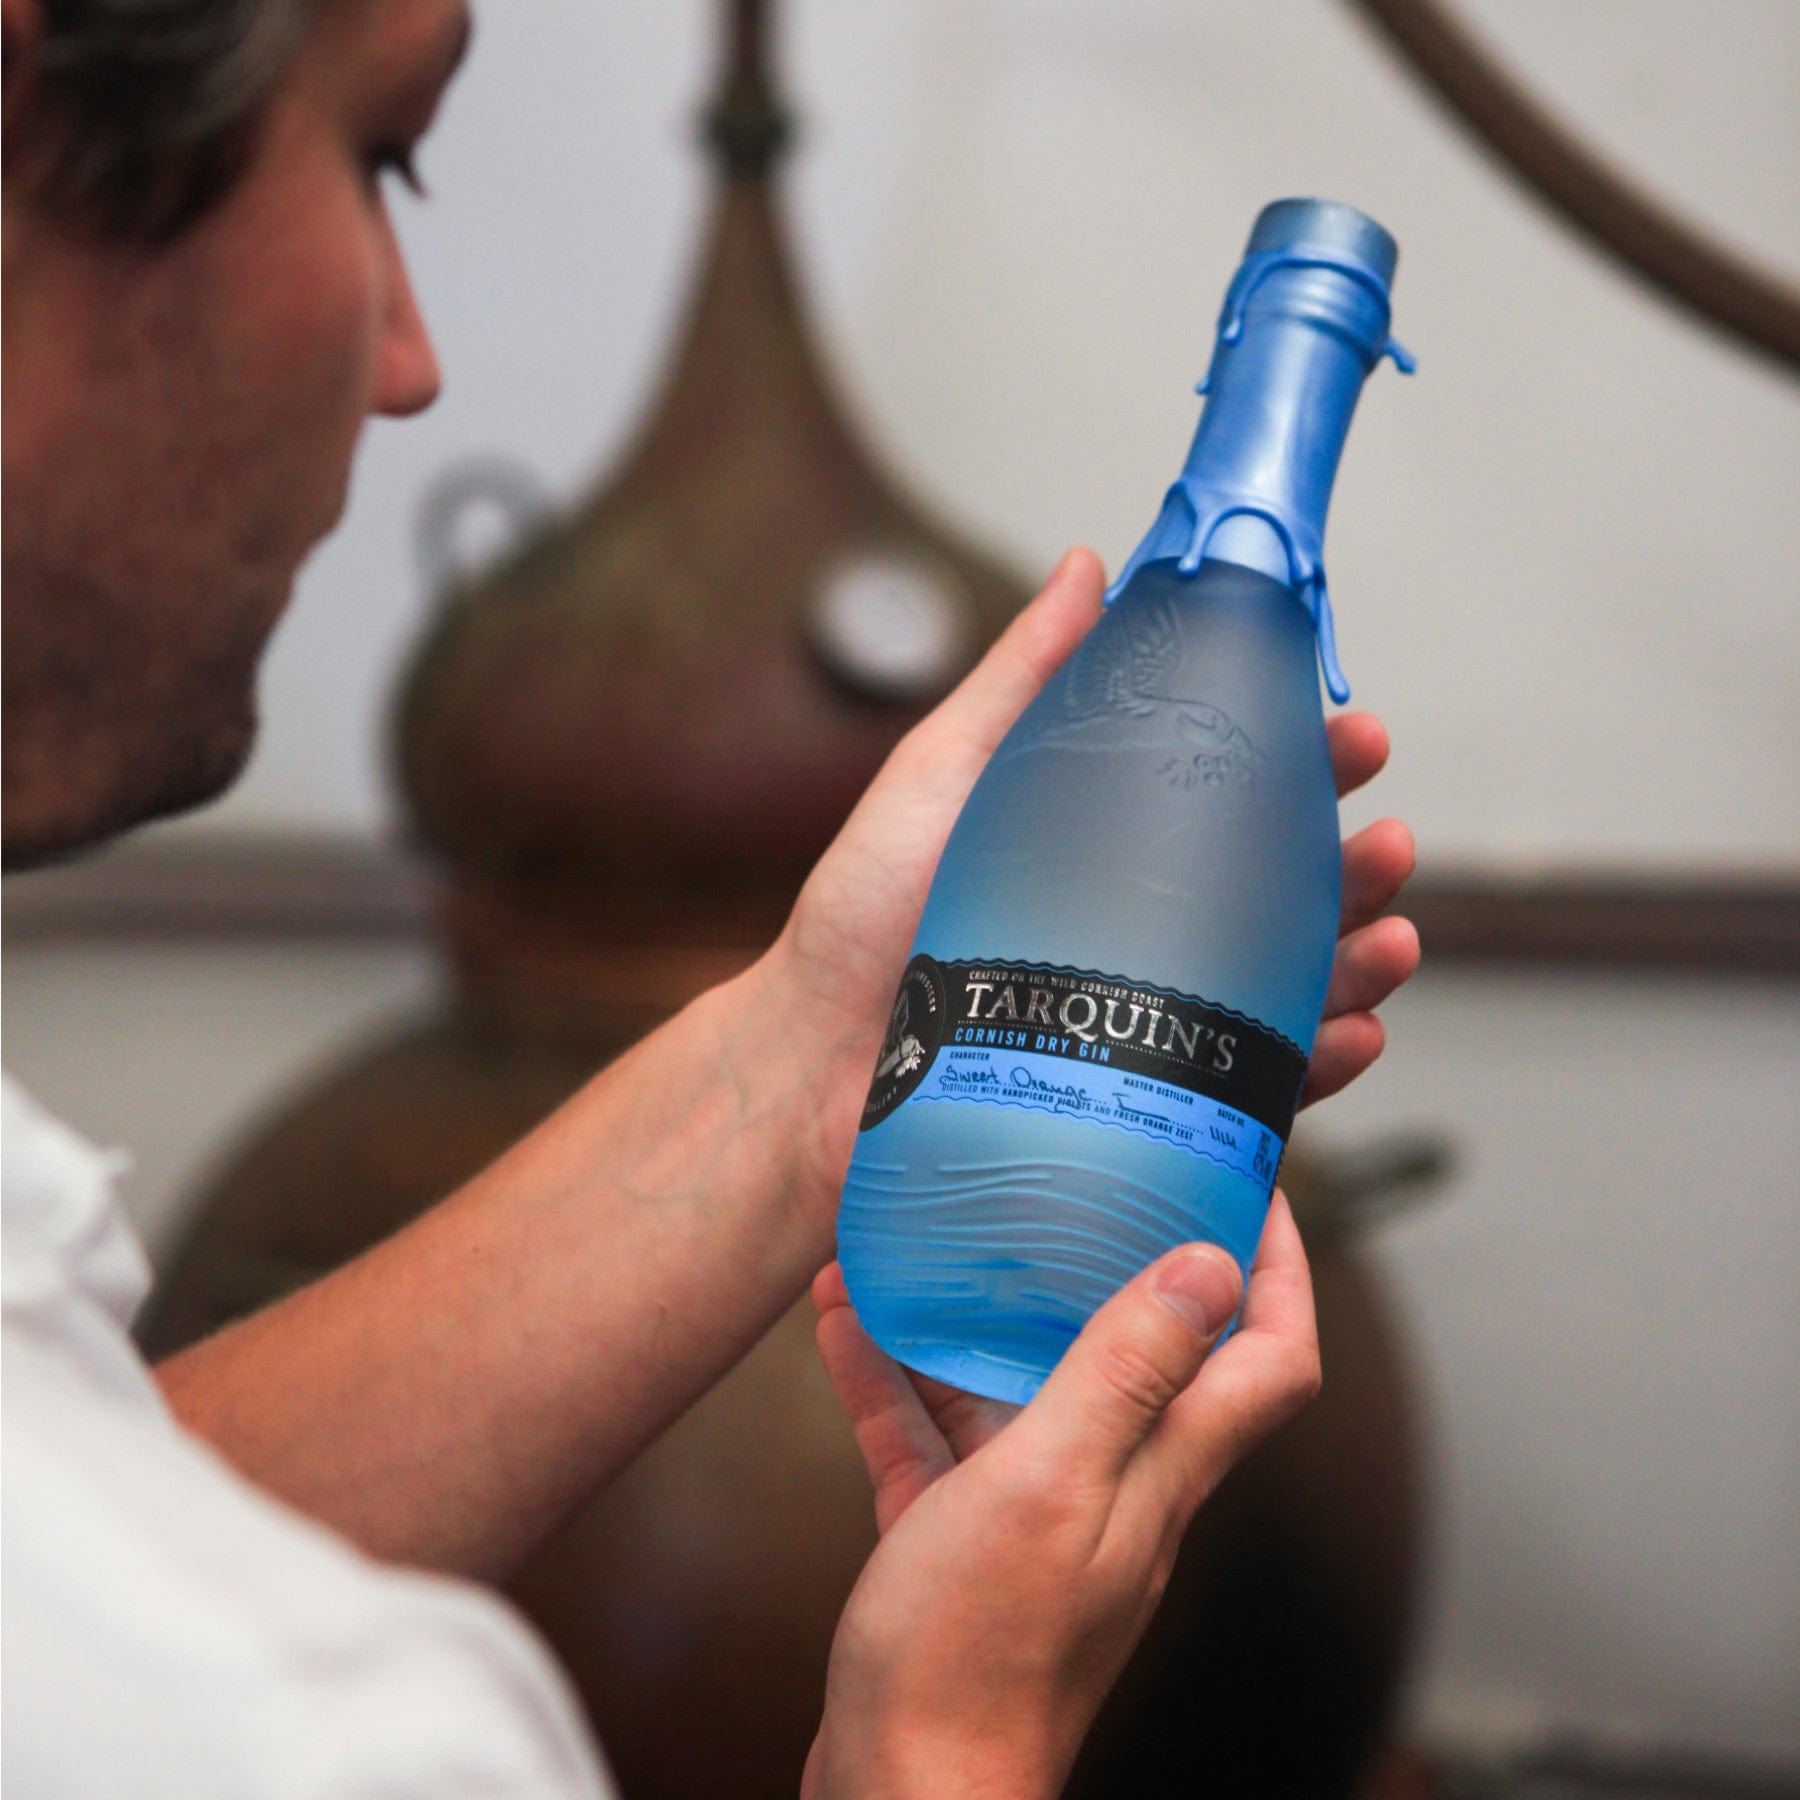 Man examining Tarquin's Cornish Gin blue bottle in distillery with copper still in background